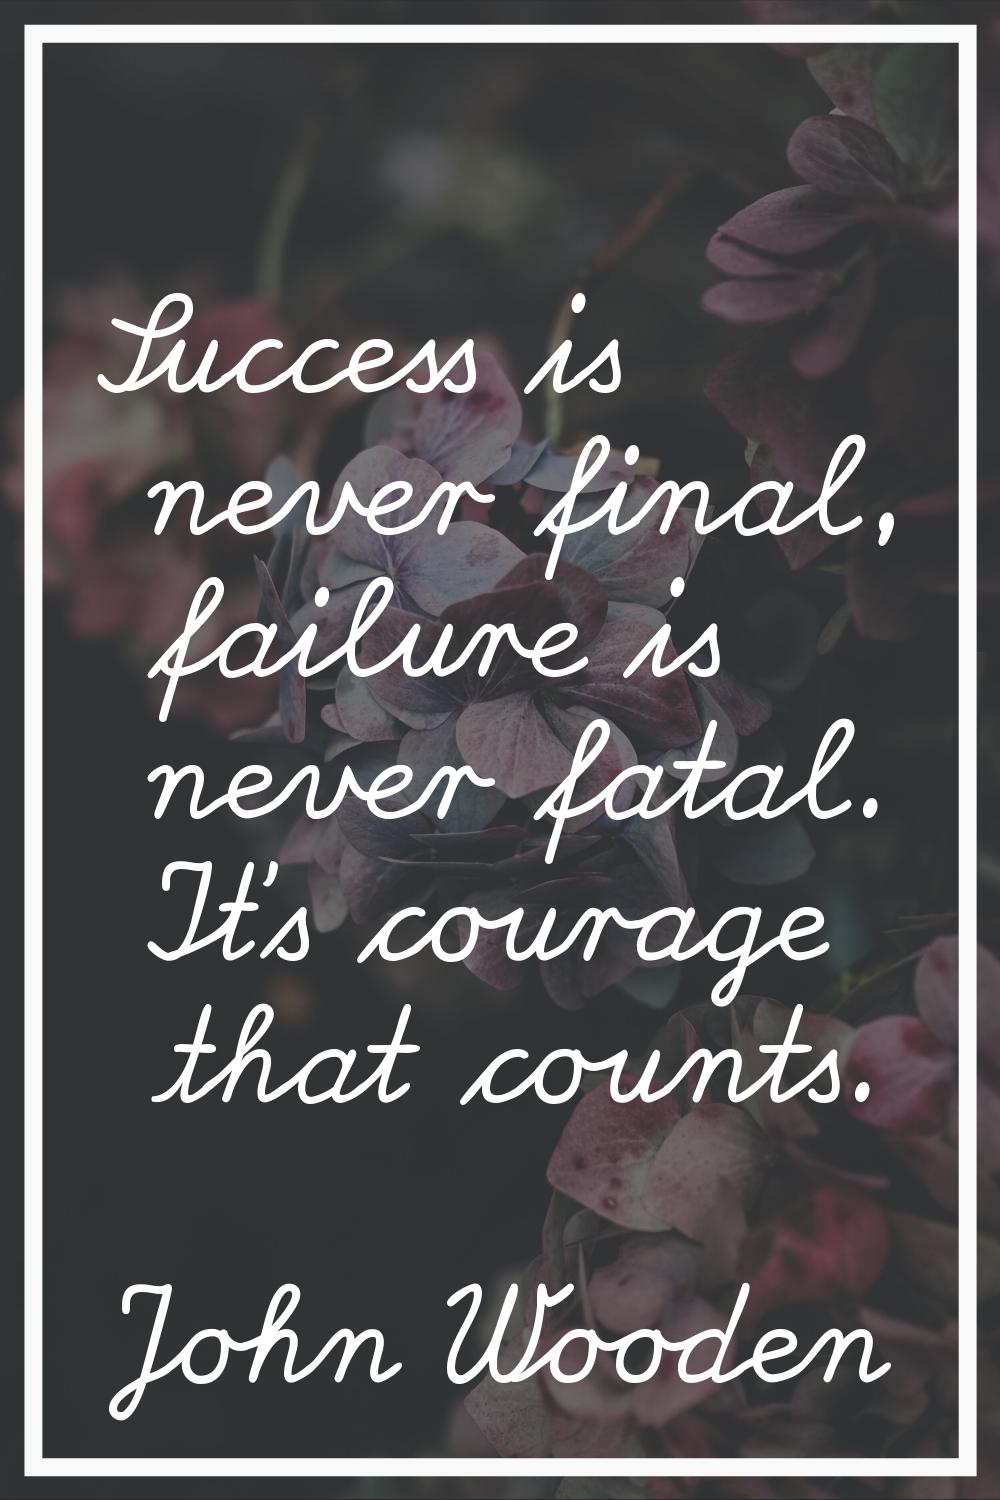 Success is never final, failure is never fatal. It's courage that counts.